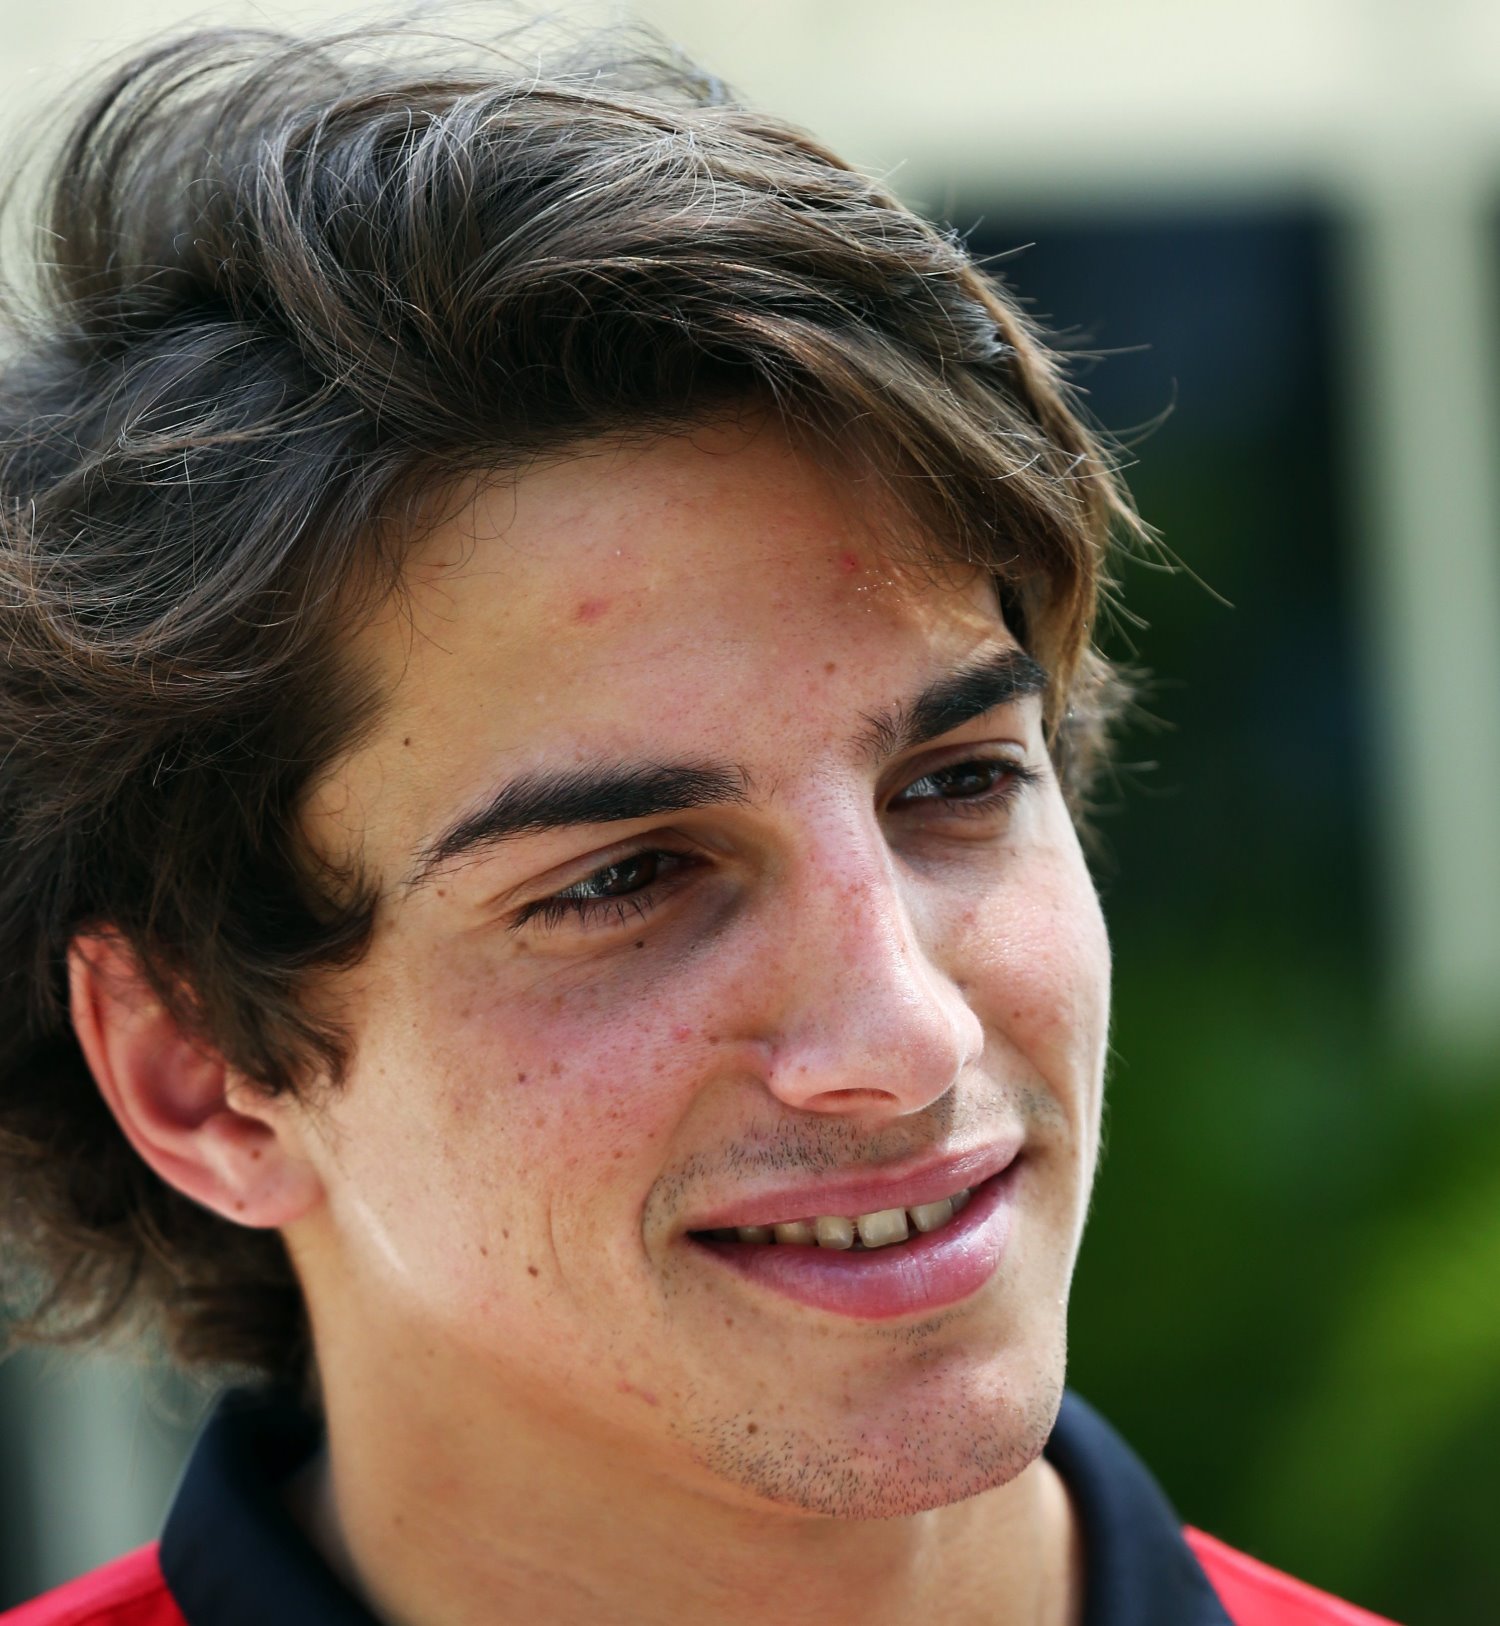 Roberto Merhi probably does not have enough money to buy a fulltime F1 ride